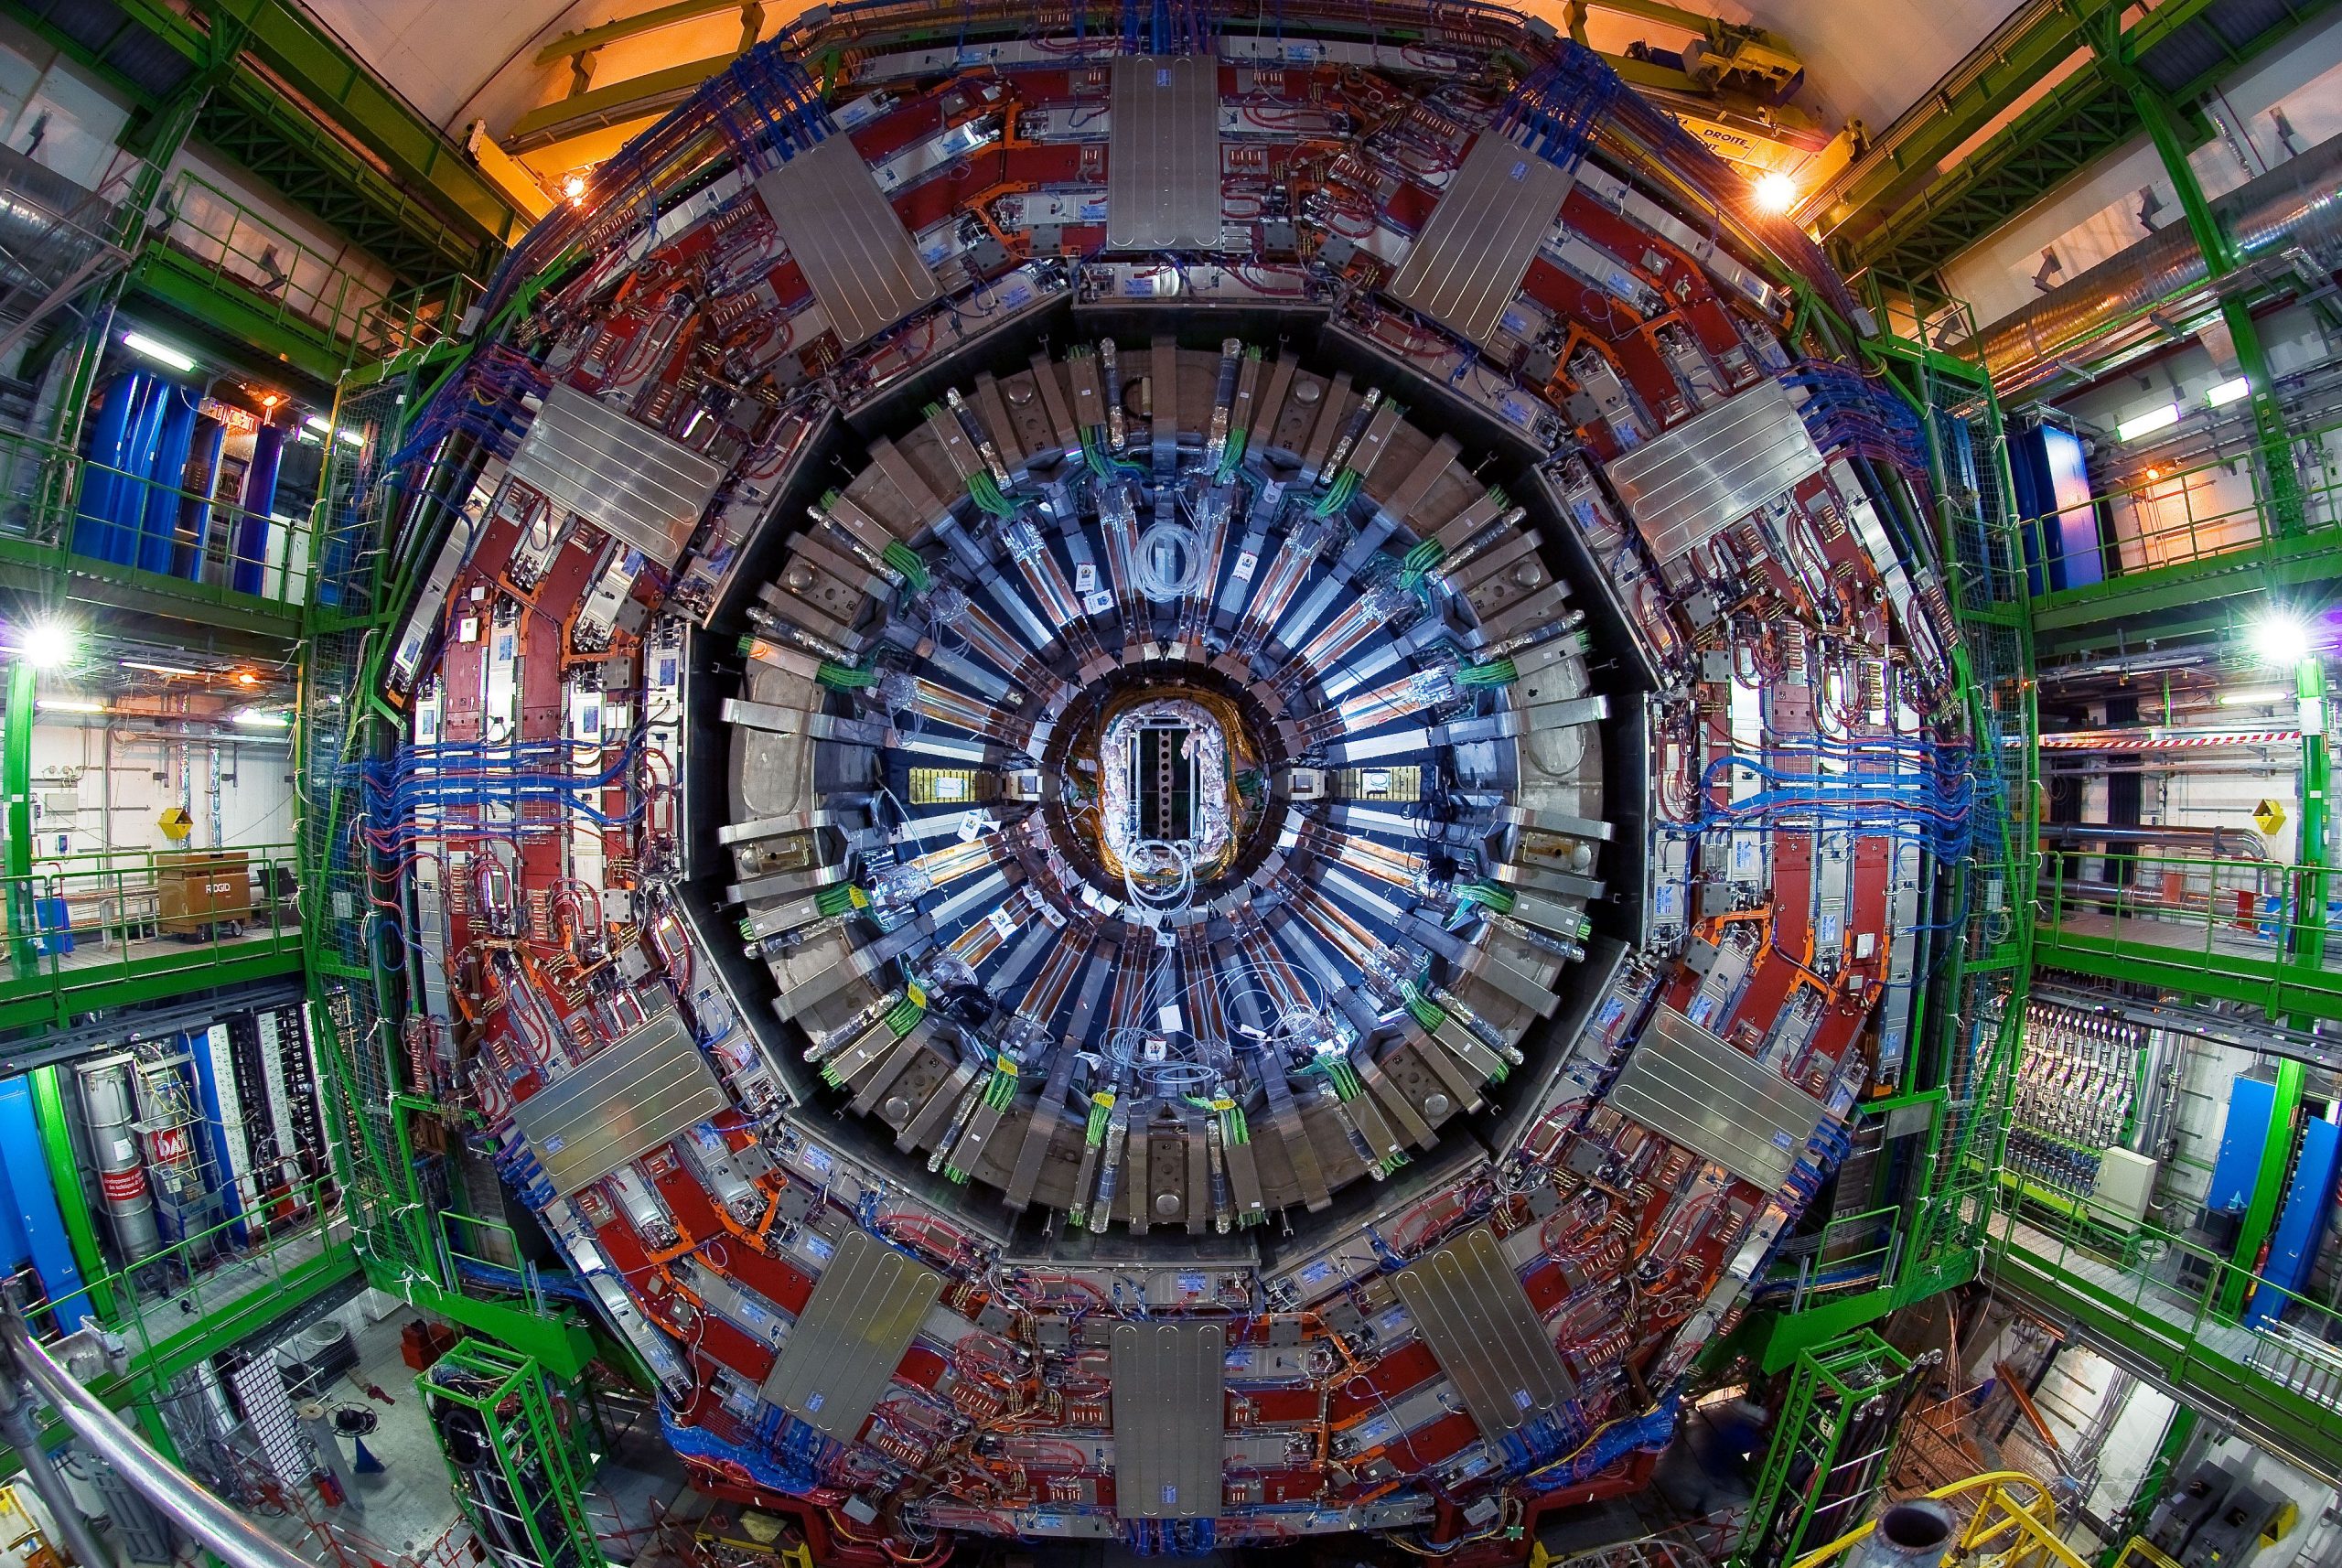 Humanity’s Quest to Find New Physics Hinges on a Controversial Particle Smasher